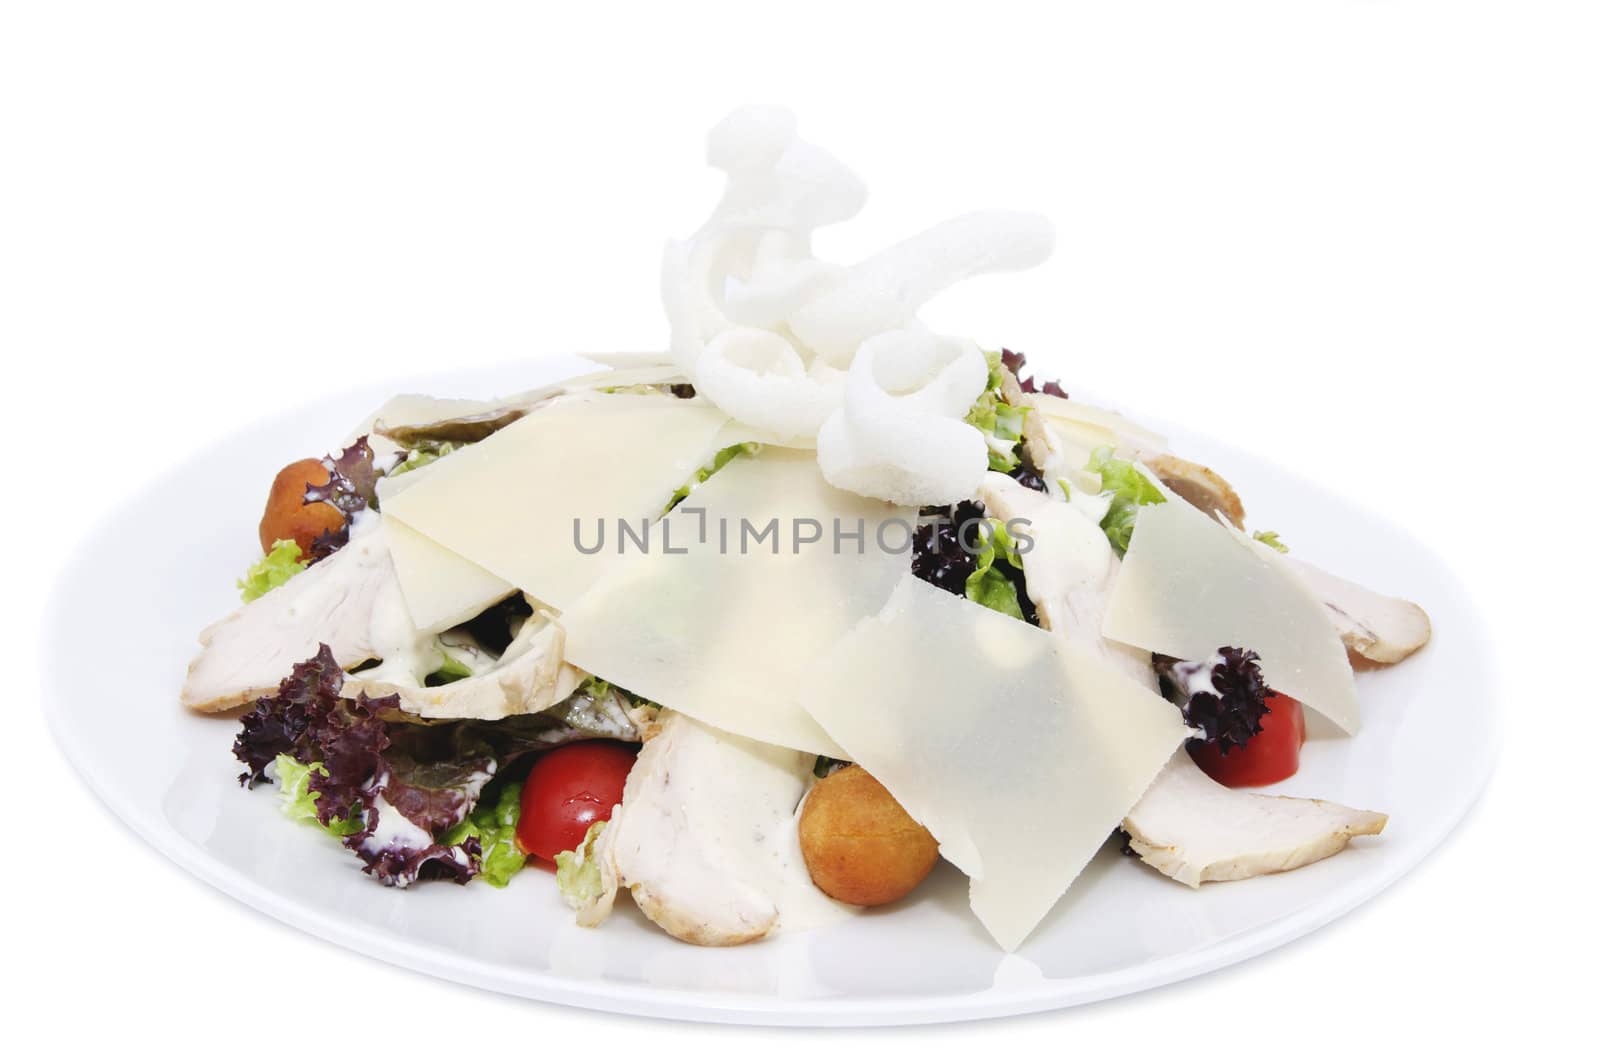 salad with vegetables, meat and cheese on white background